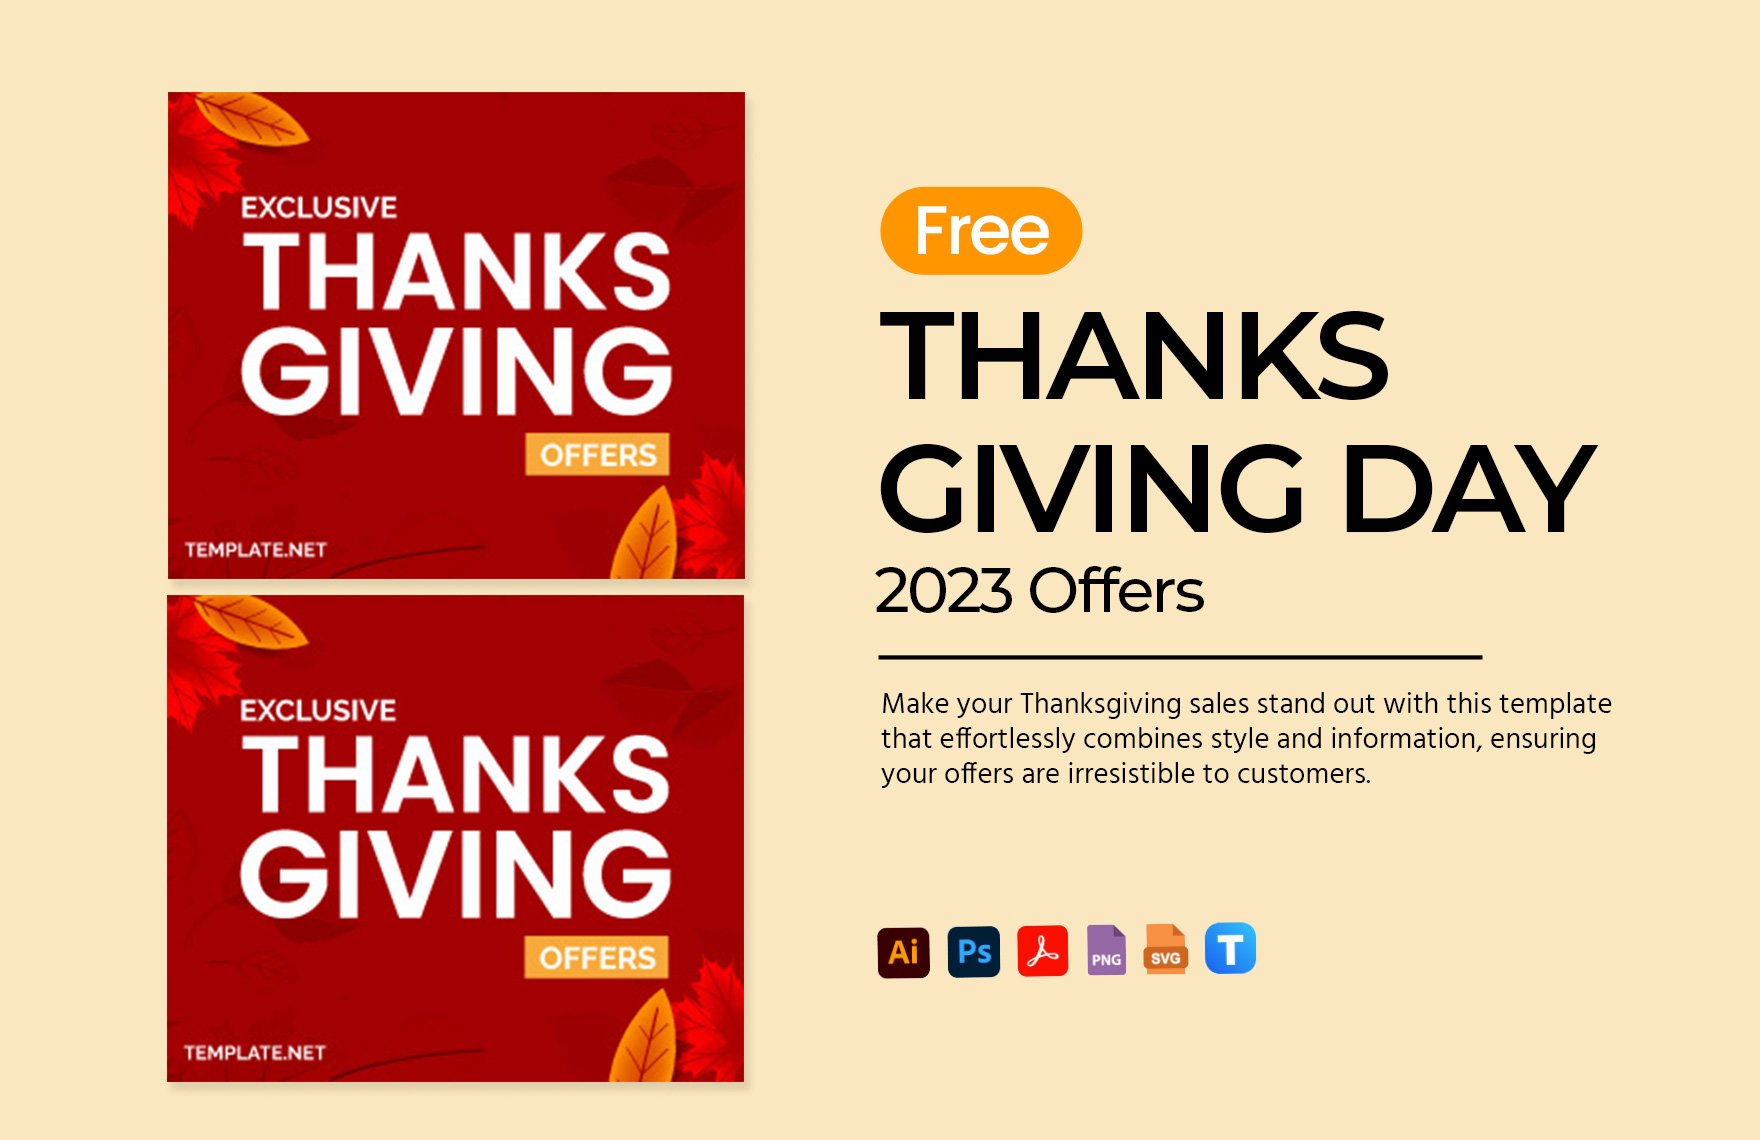 Free Thanksgiving Day 2023 Offers